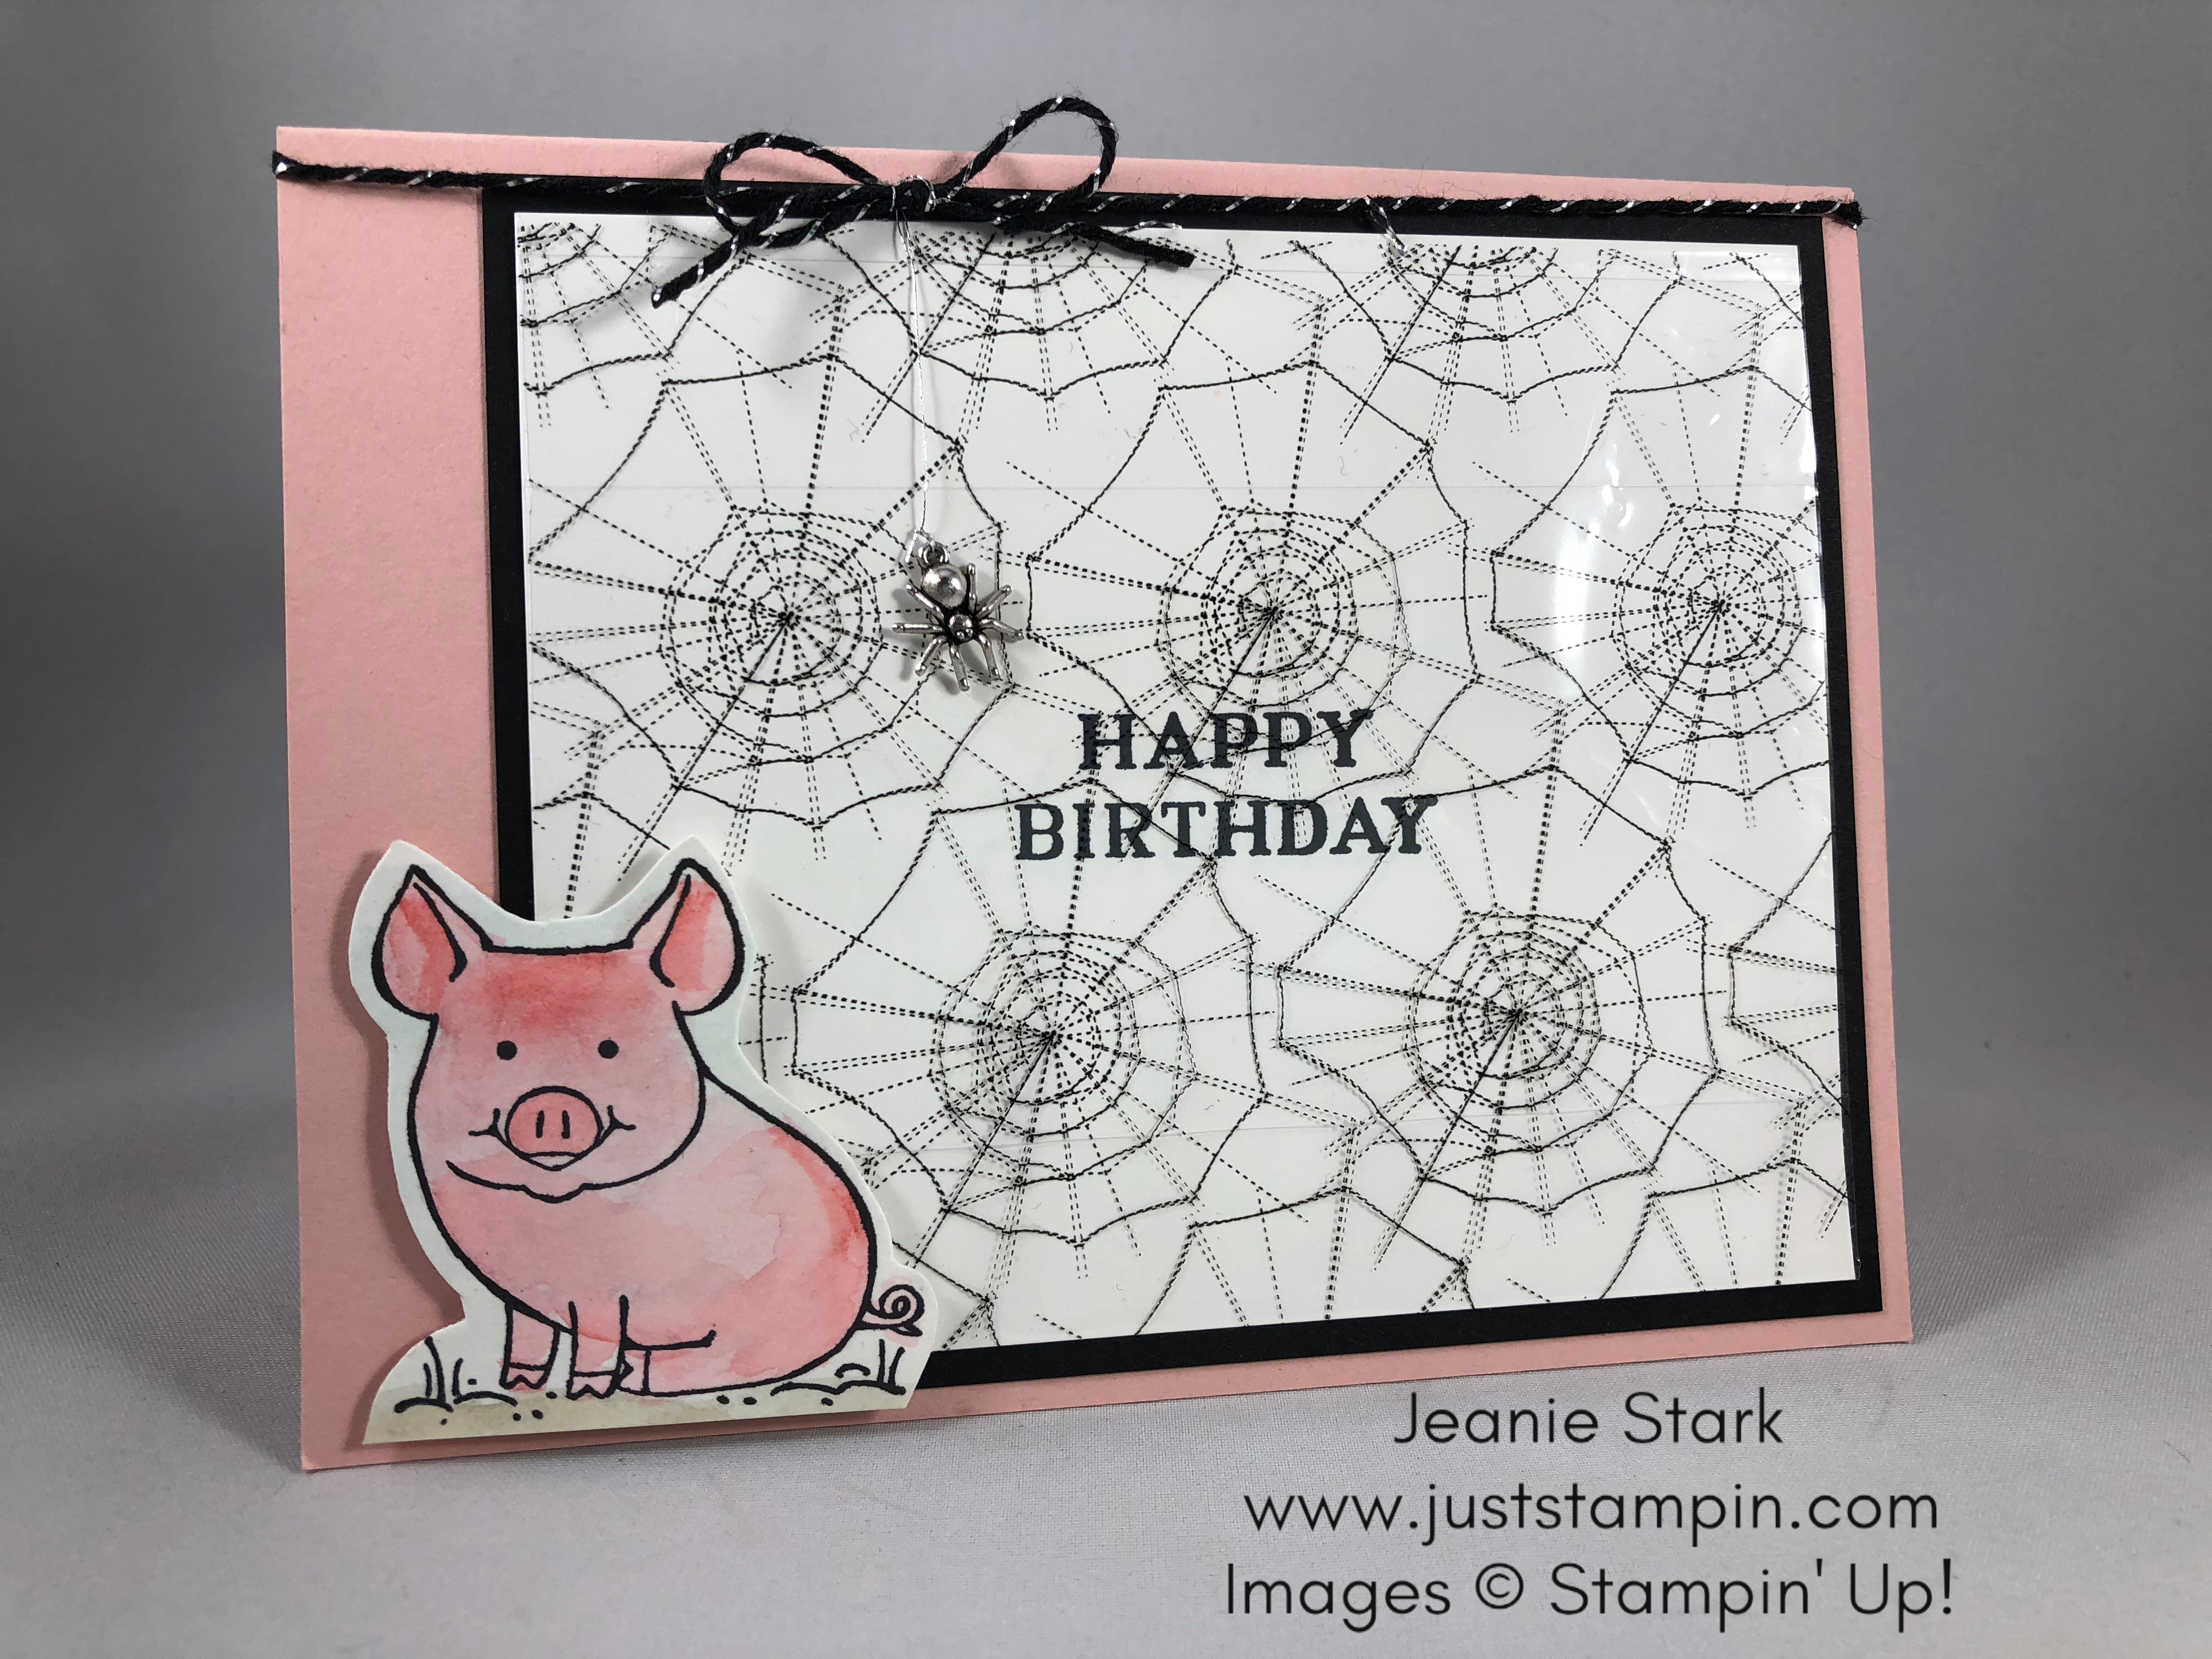 Stampin Up This Little Piggy and Paper Pumpkin Frights & Delights alternative birthday card idea - Jeanie Stark StampinUp www.juststampin.com